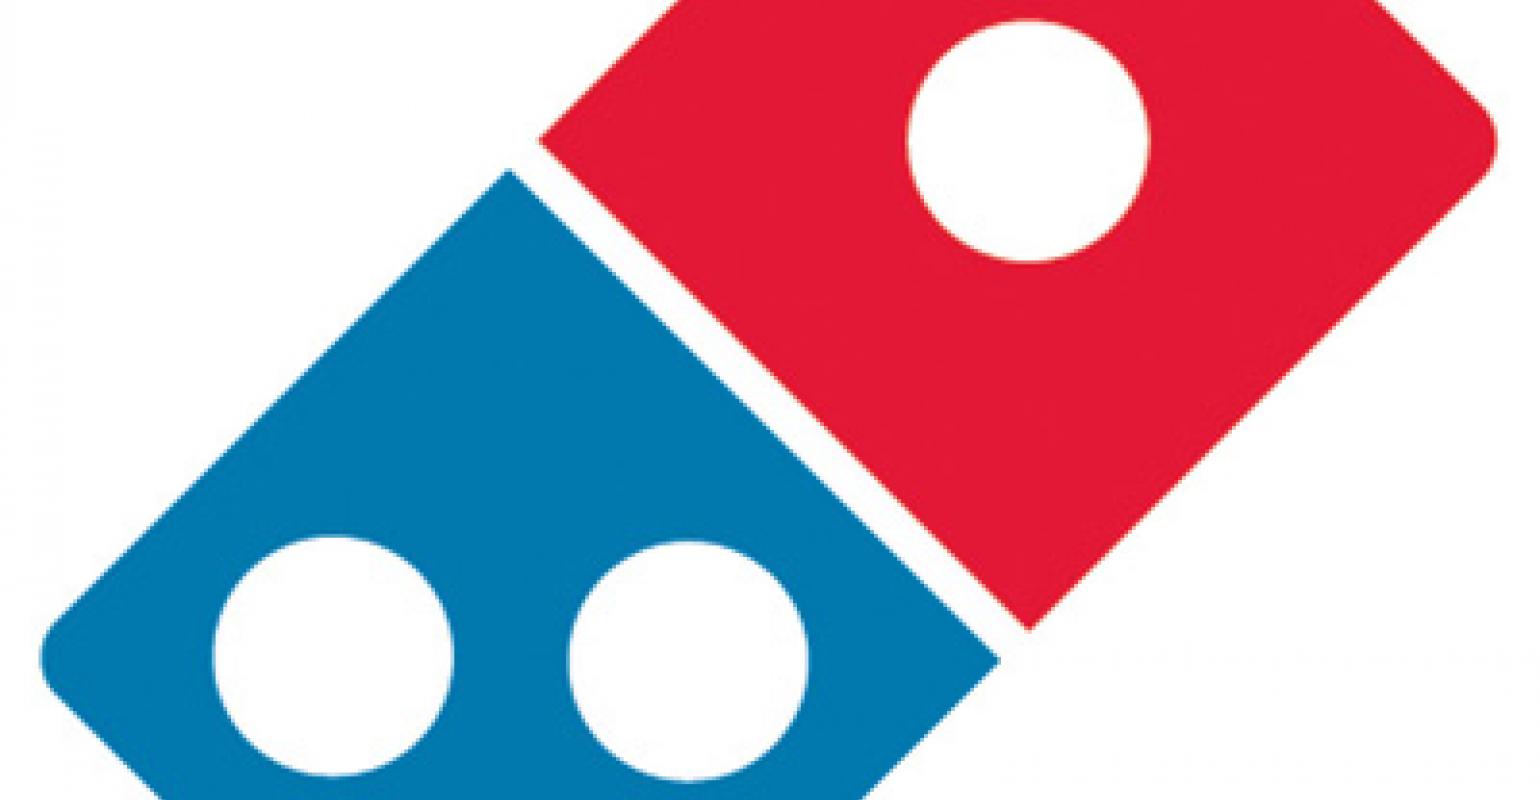 Domino's Pizza unveils new logo and restaurant design Nation's